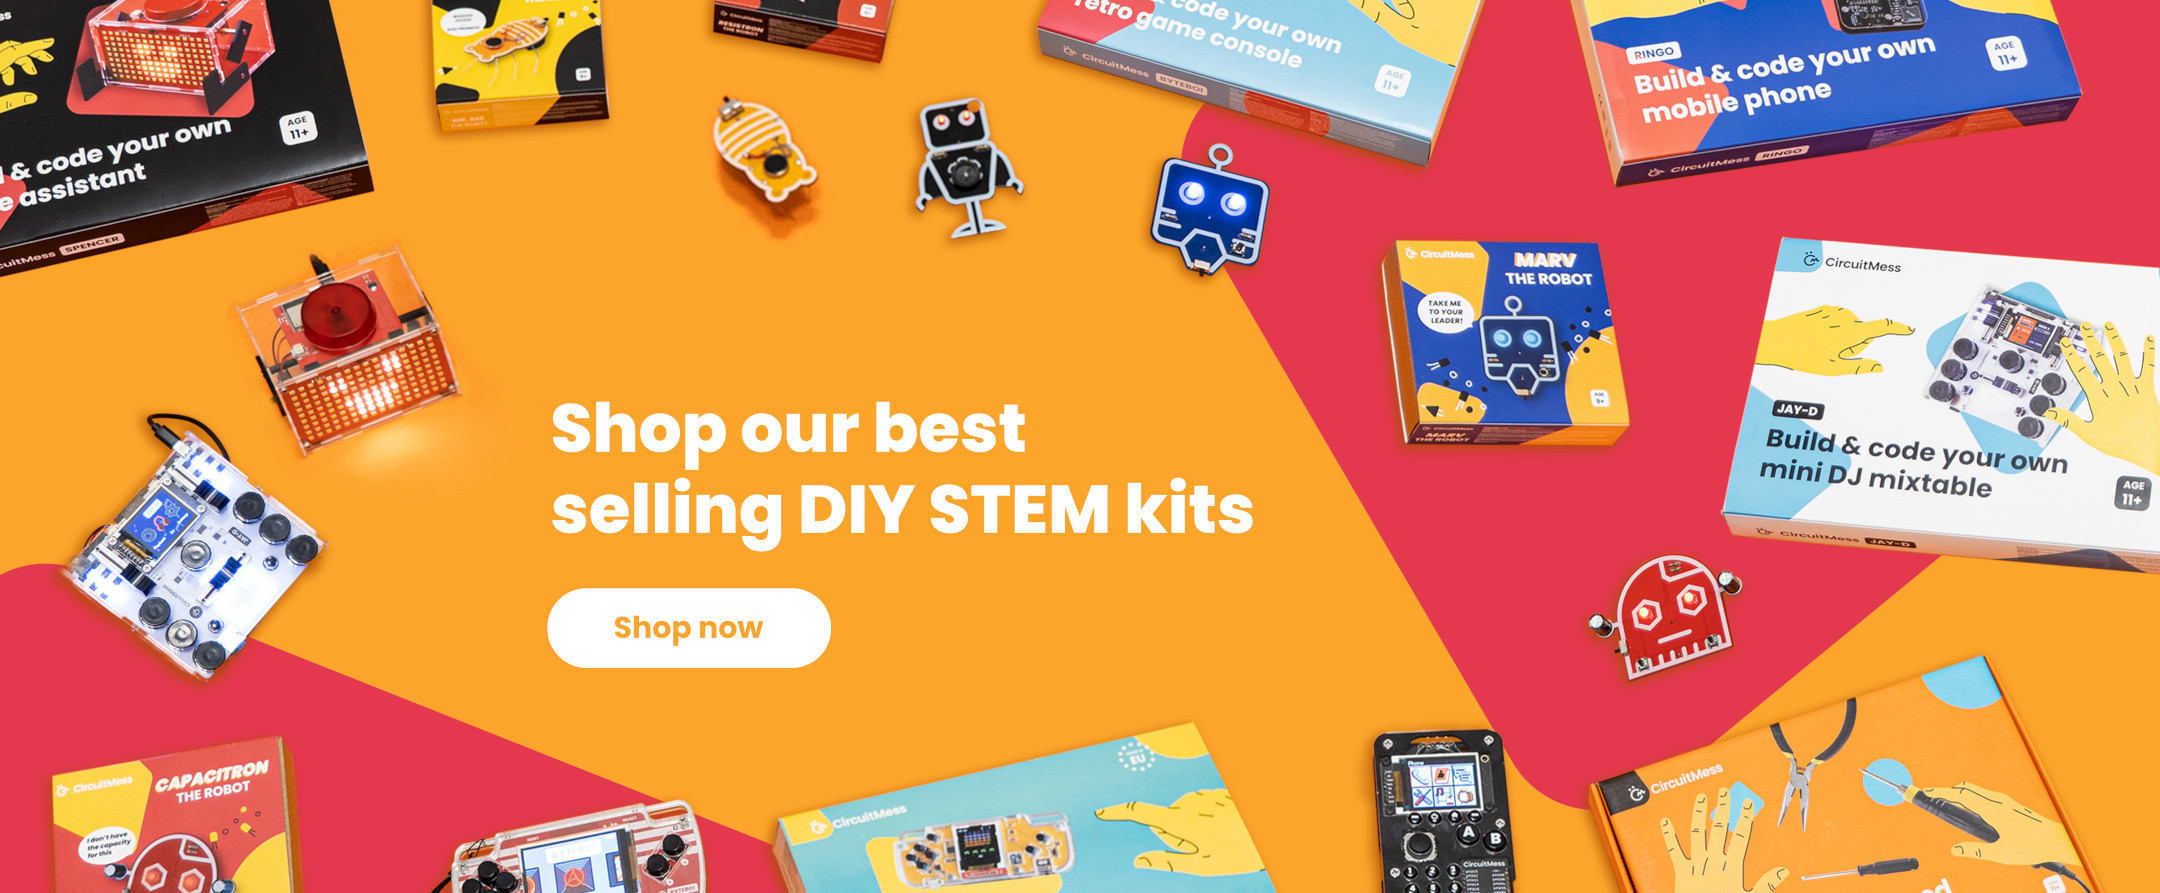 Fullwidth section: Shop our best selling DIY STEM kits